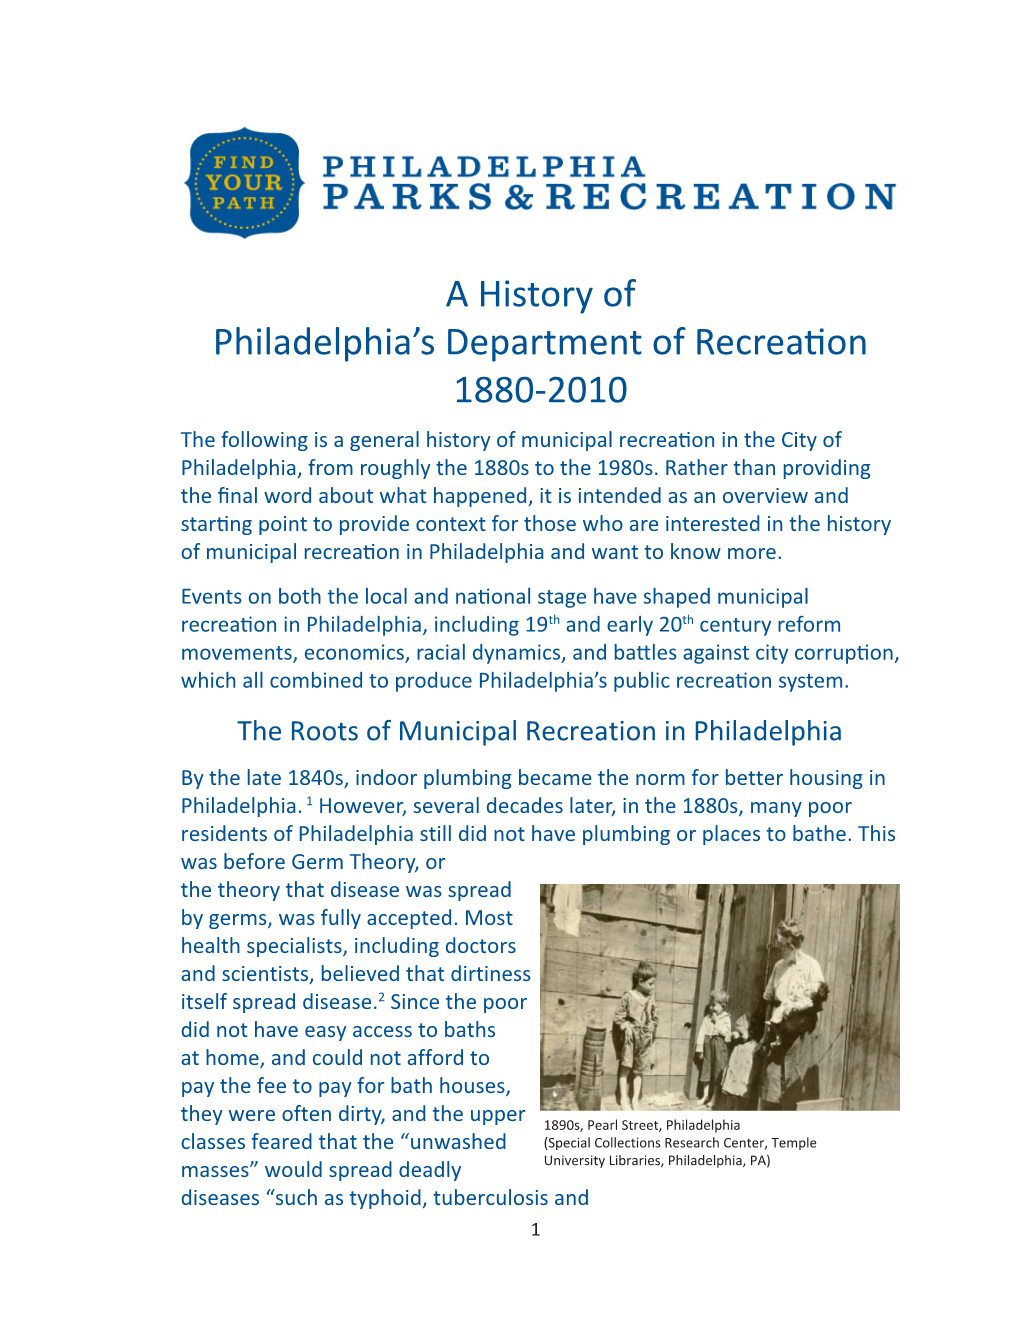 A History of Philadelphia's Department of Recreation 1880-2010